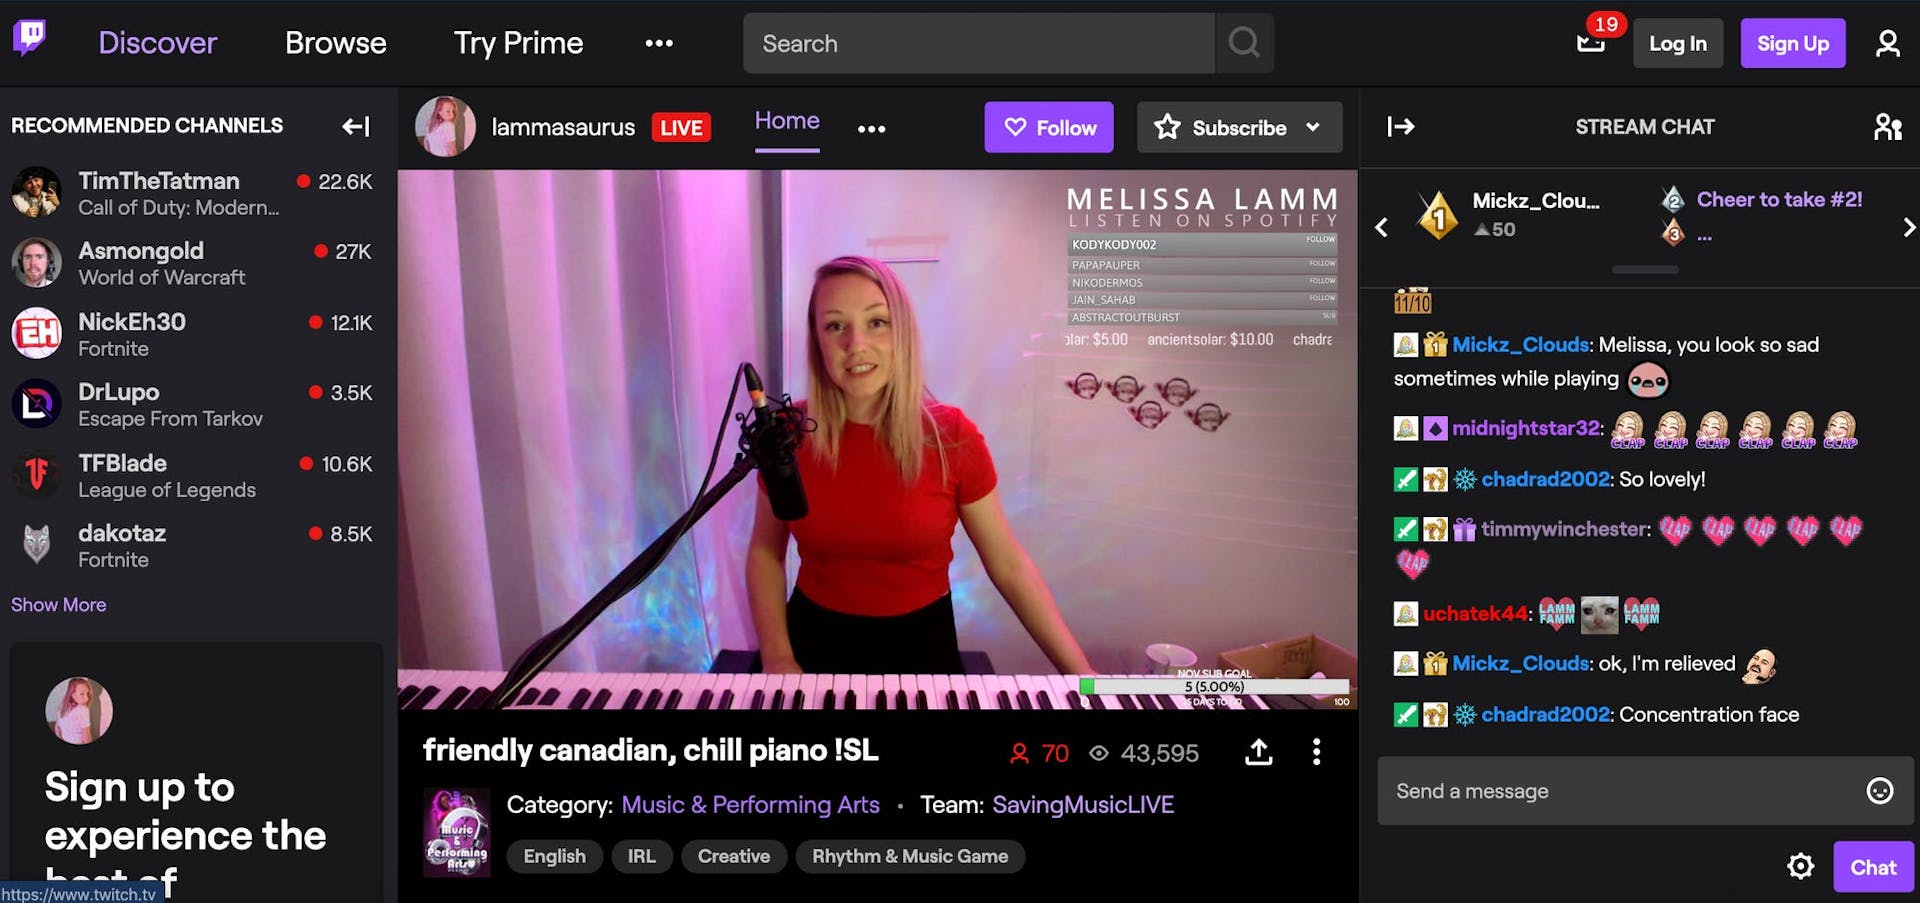 A screenshot of a musician live streaming on Twitch